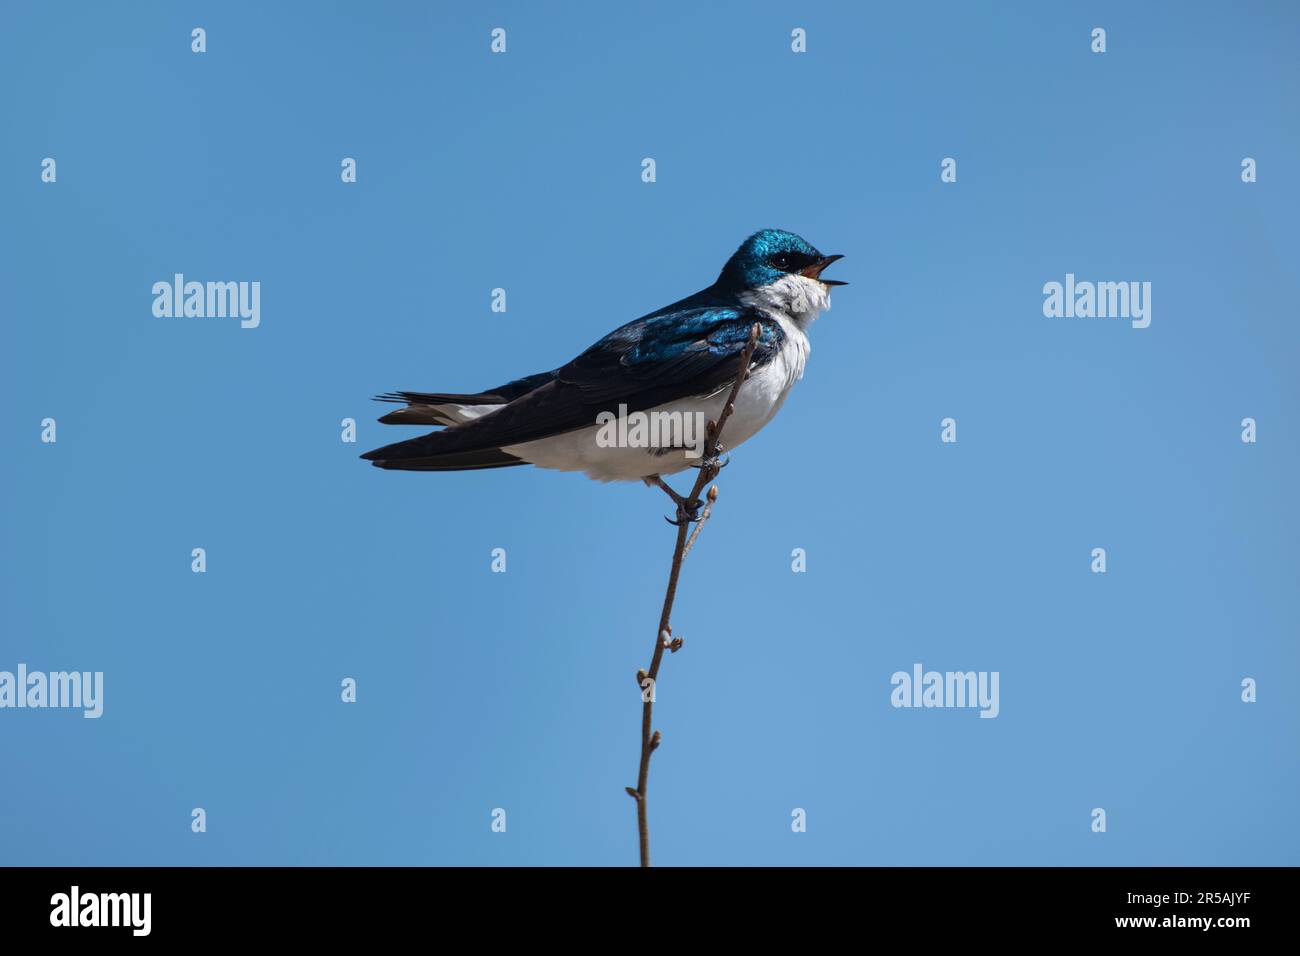 Tree swallow bird Tachycineta bicolor singing while perching on a branch with a blue sky in the background Stock Photo